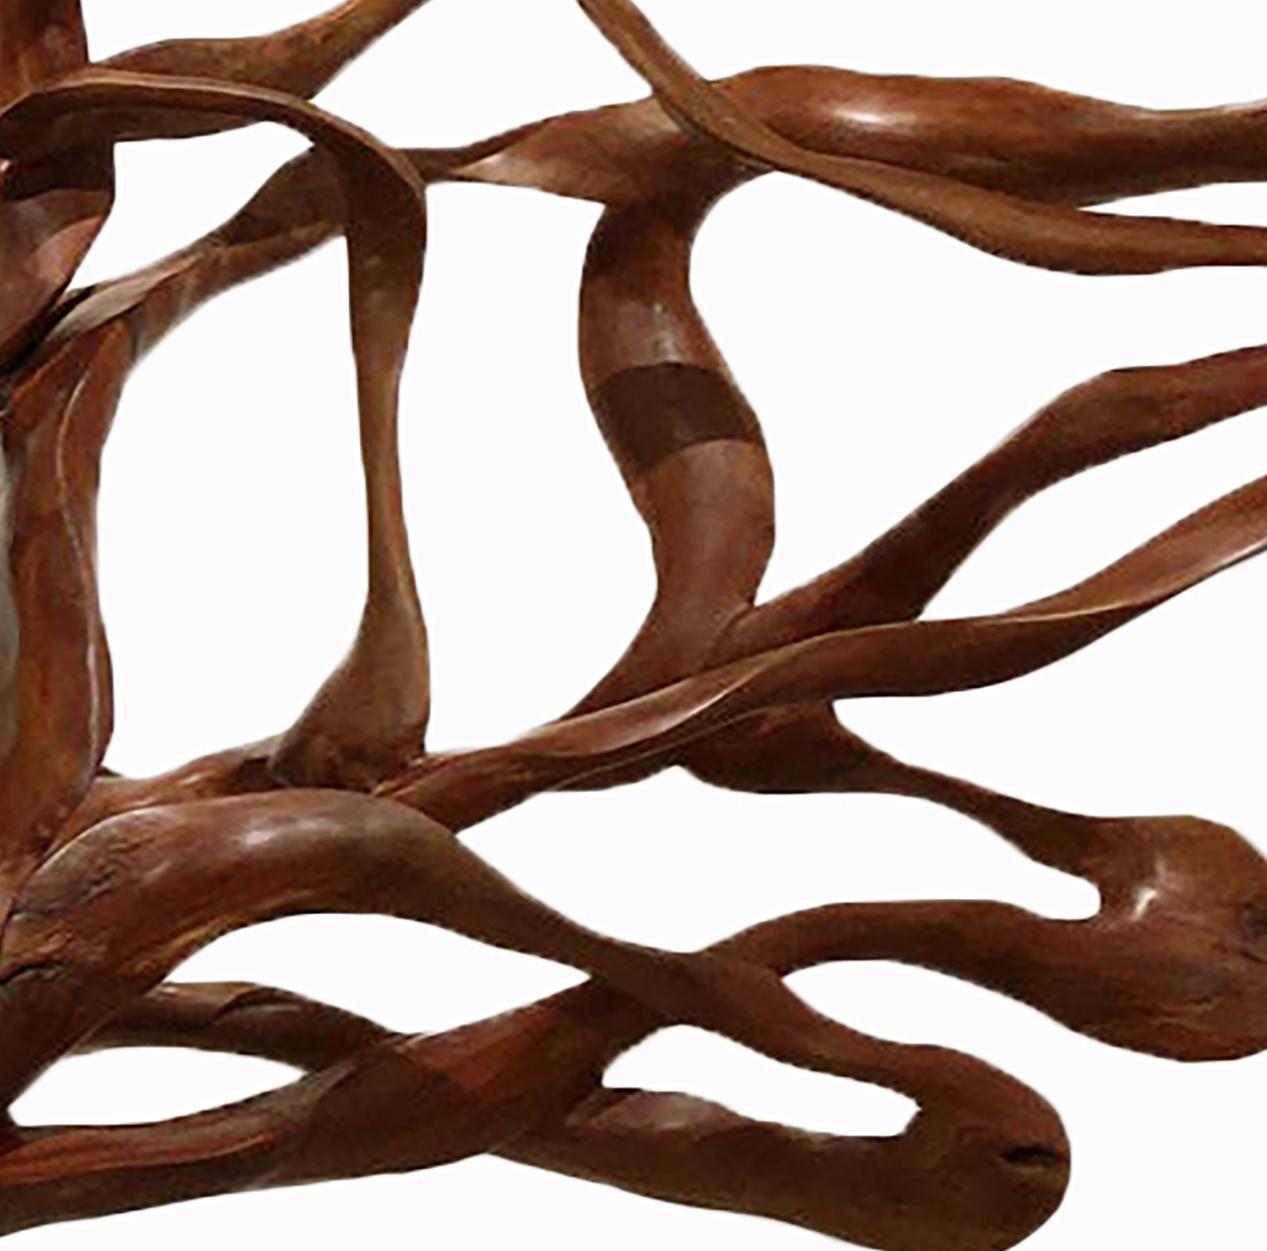 Radiance - 21st Century, Contemporary, Abstract Sculpture, Lychee Wood, Roots 2